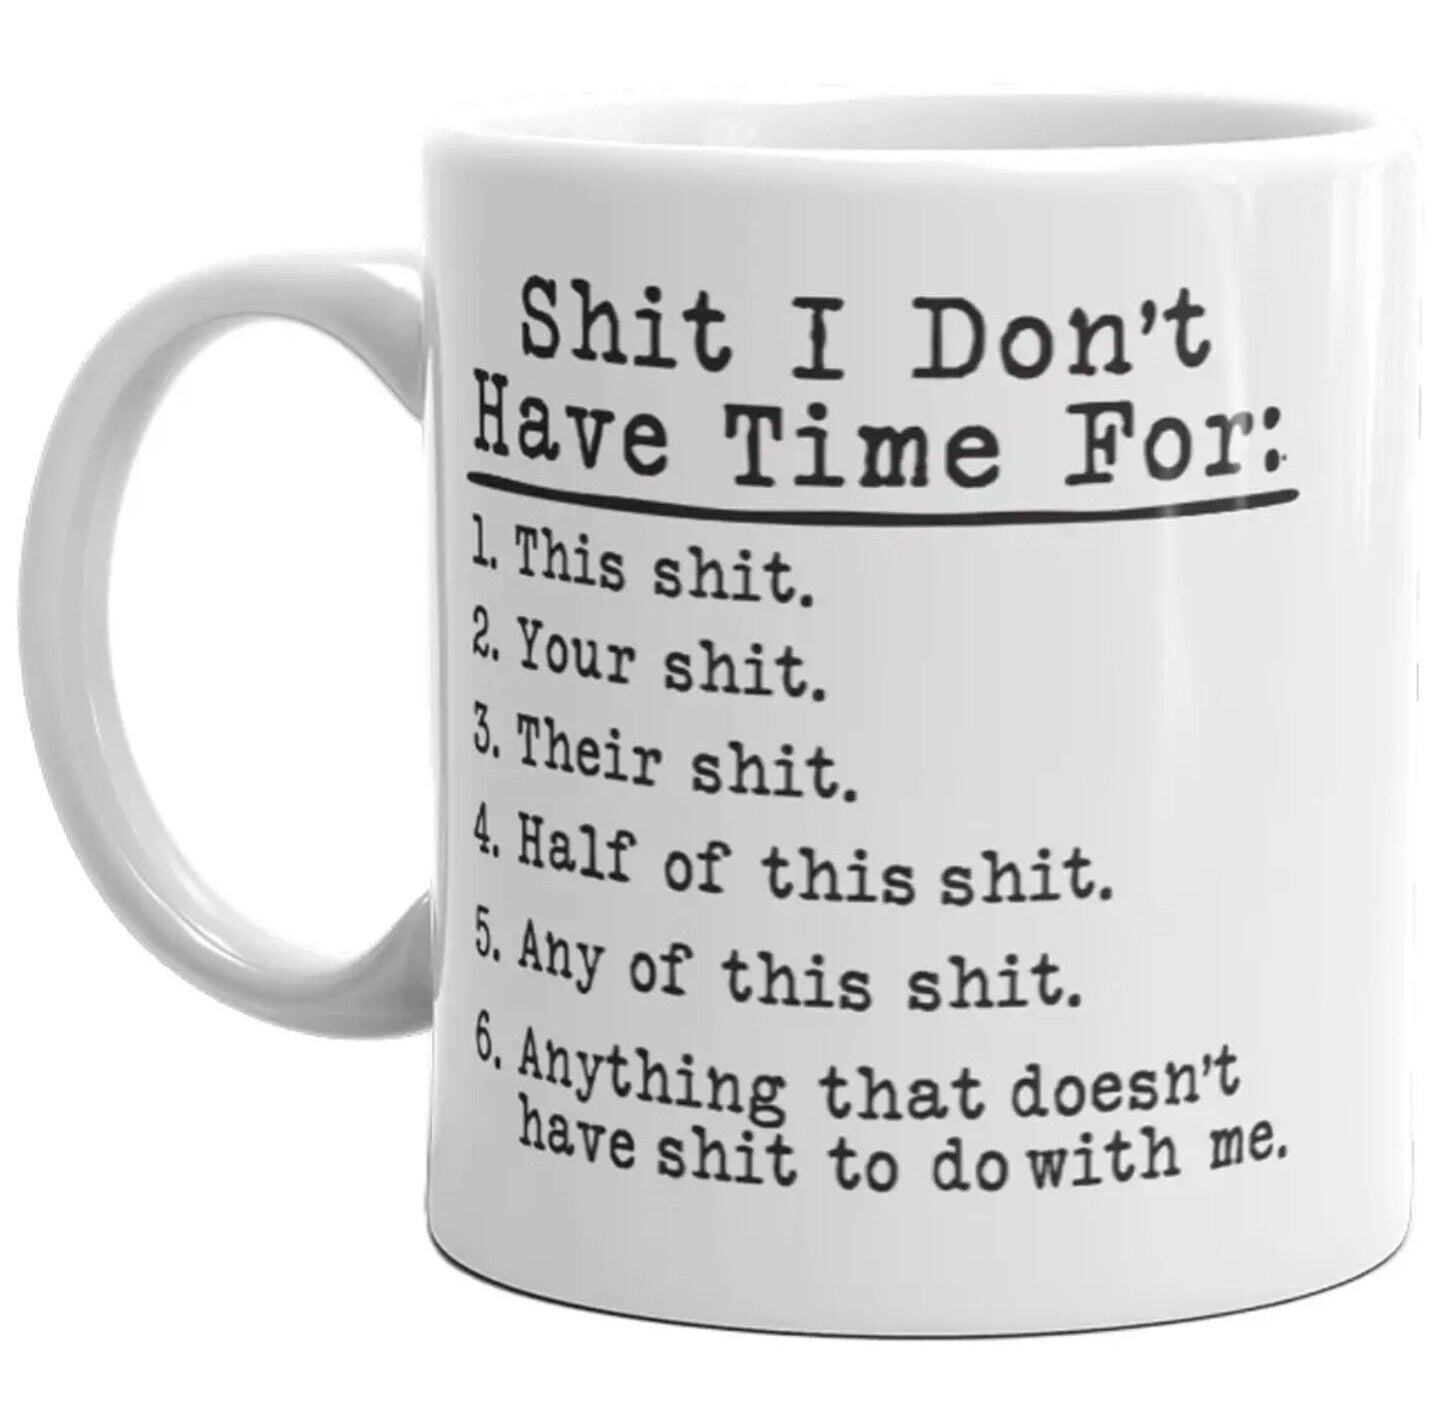 Shit I Don't Have Time For - Funny Coffee Cup - 11oz or 15oz Mug